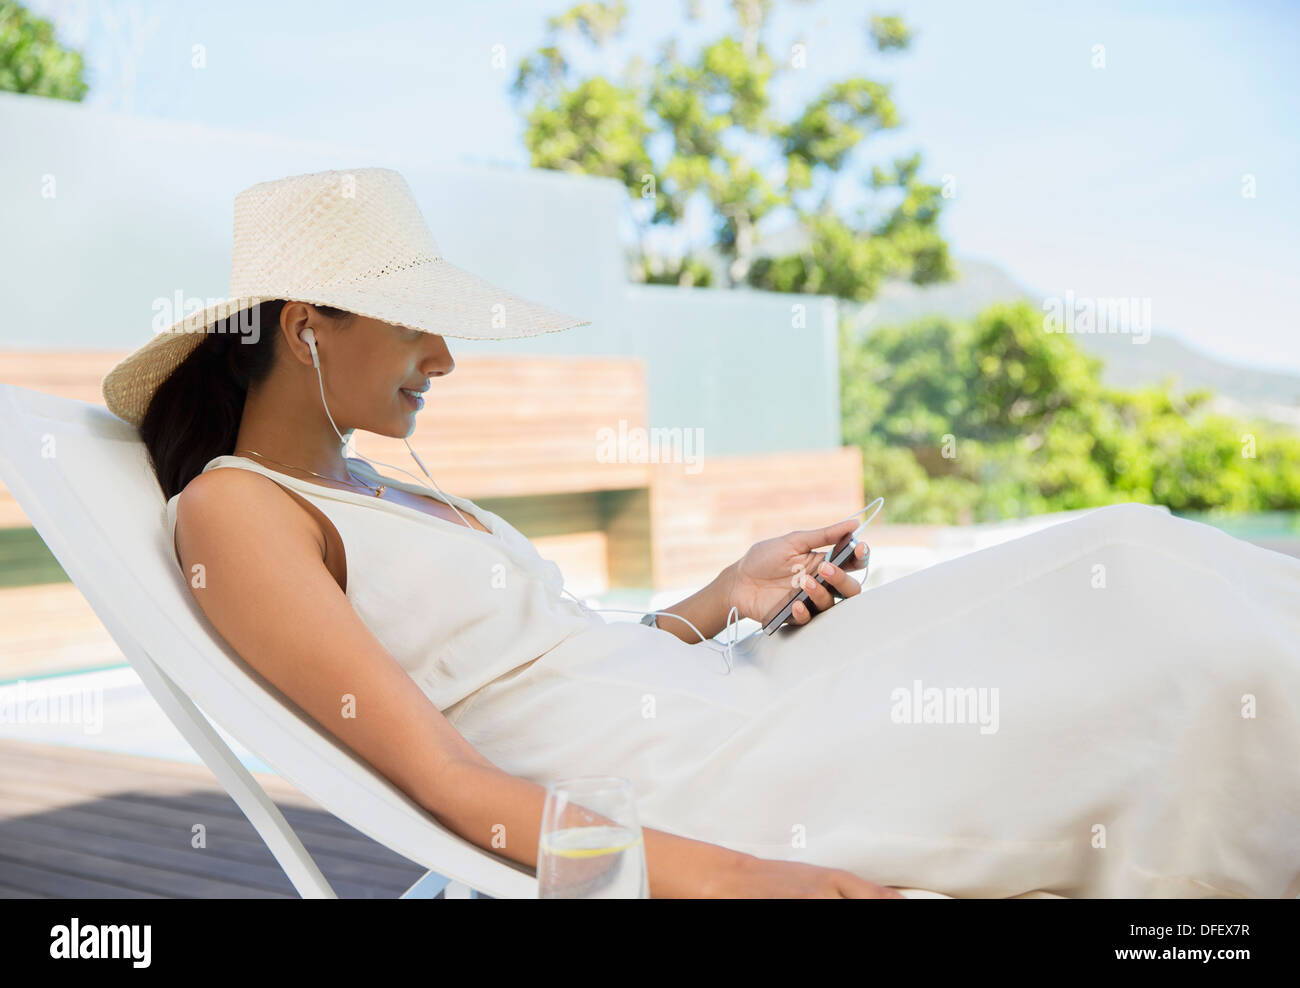 Woman listening to mp3 player outdoors Banque D'Images